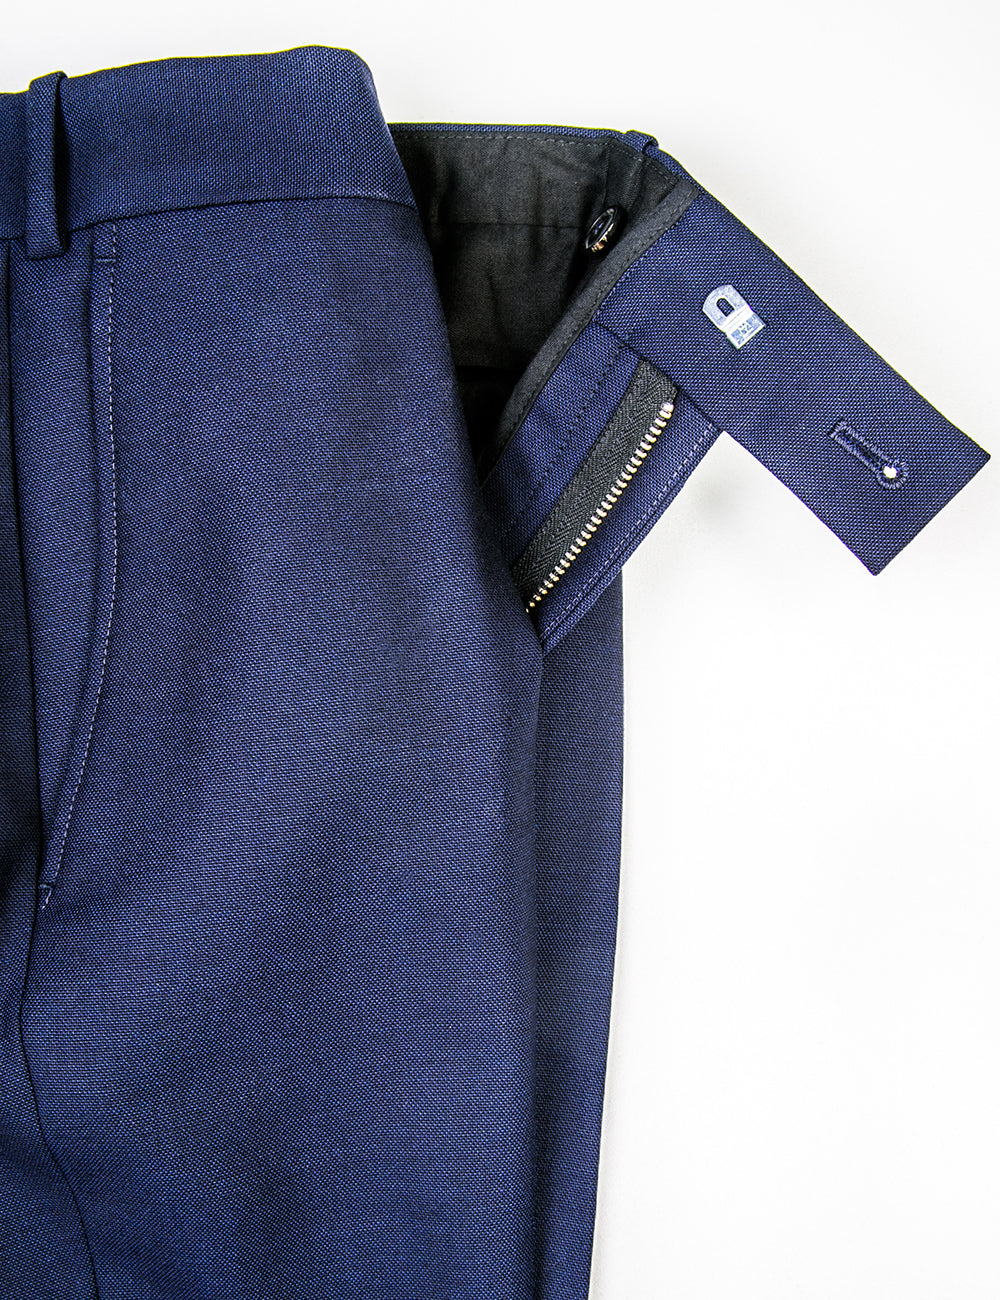 Detail of BKT50 Tailored Trouser in Travel-Ready Wool - Vivid Navy showing open fly